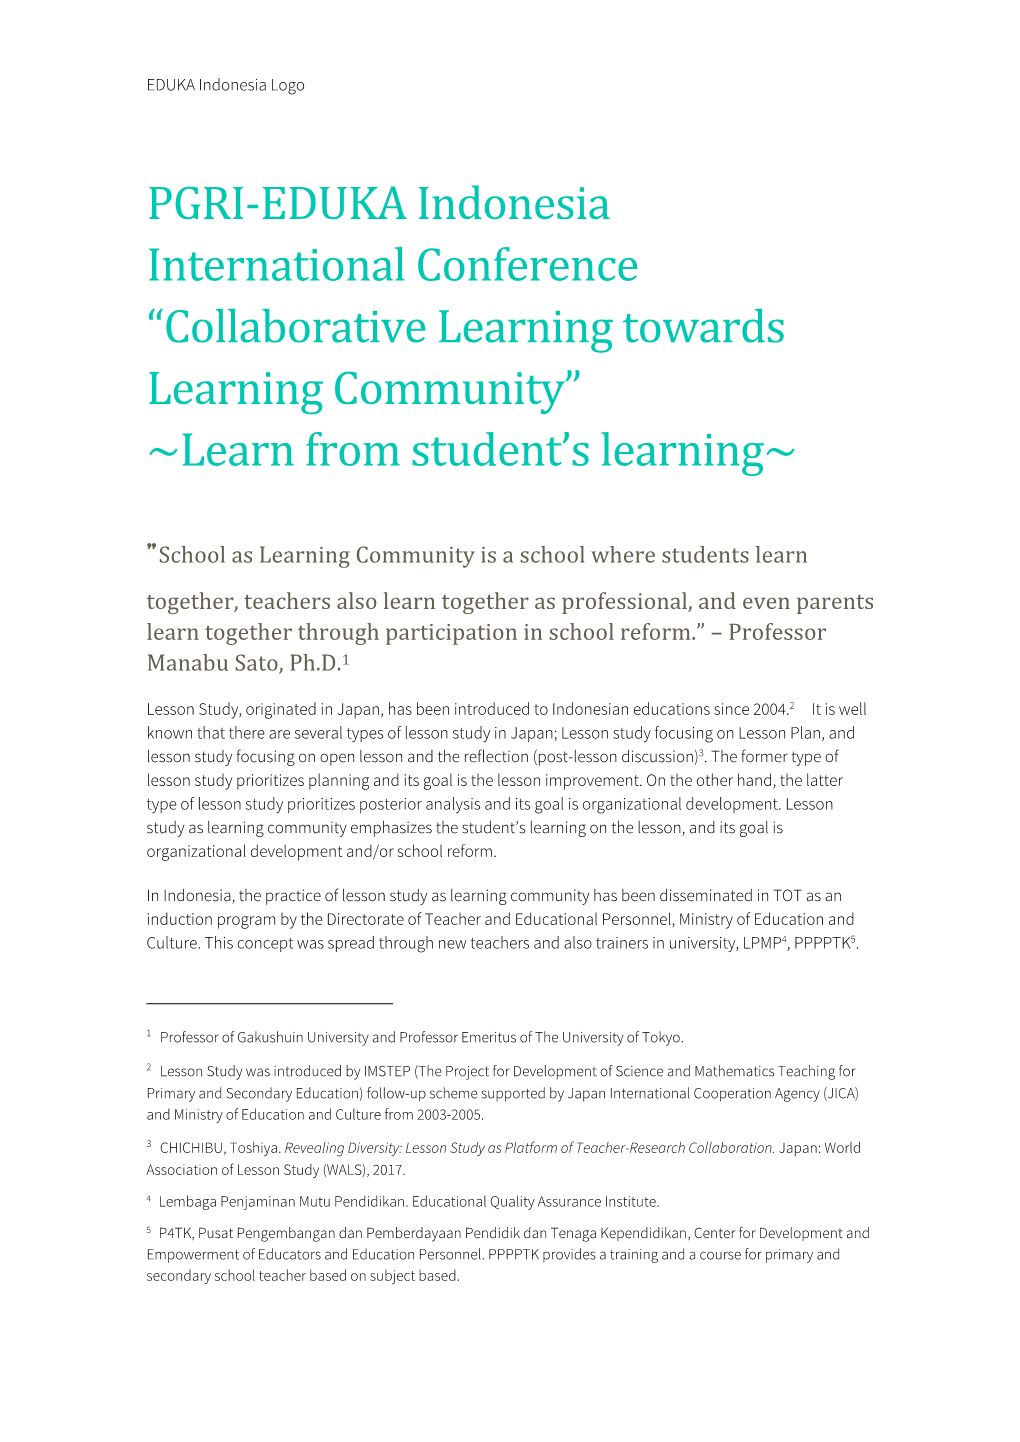 PGRI-EDUKA Indonesia International Conference “Collaborative Learning Towards Learning Community” ~Learn from Student’S Learning~